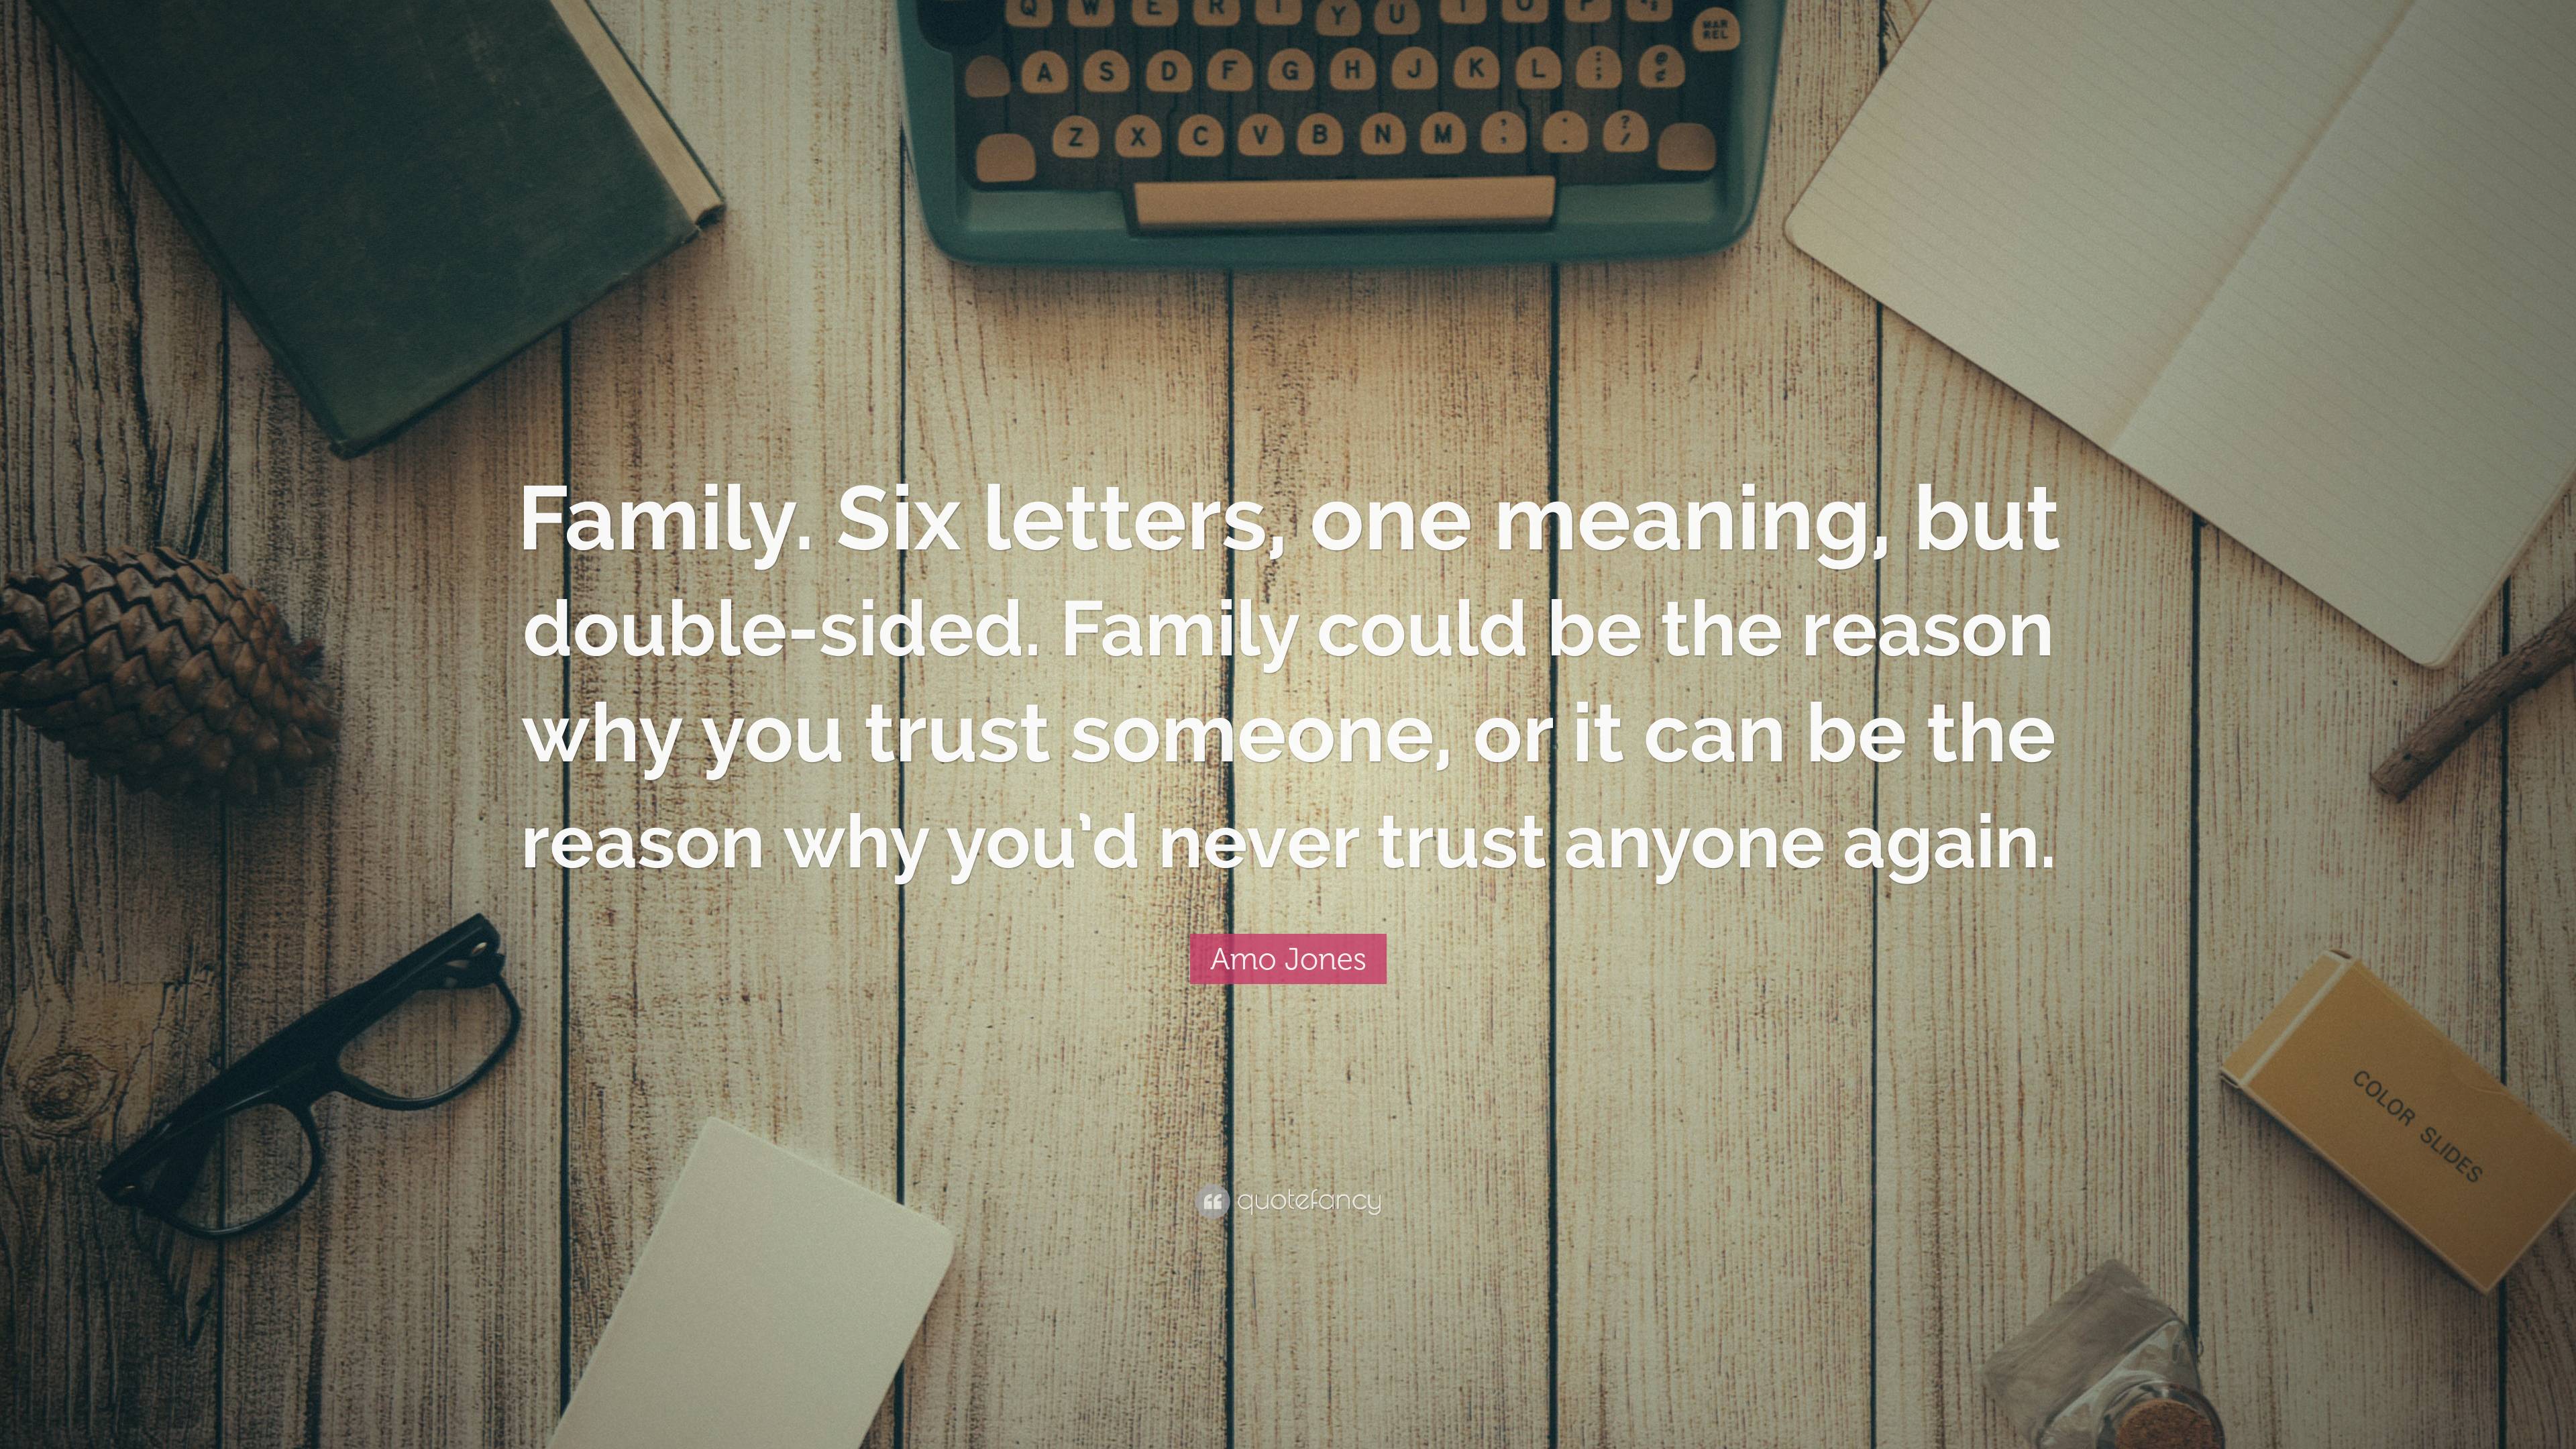 https://quotefancy.com/media/wallpaper/3840x2160/7282982-Amo-Jones-Quote-Family-Six-letters-one-meaning-but-double-sided.jpg